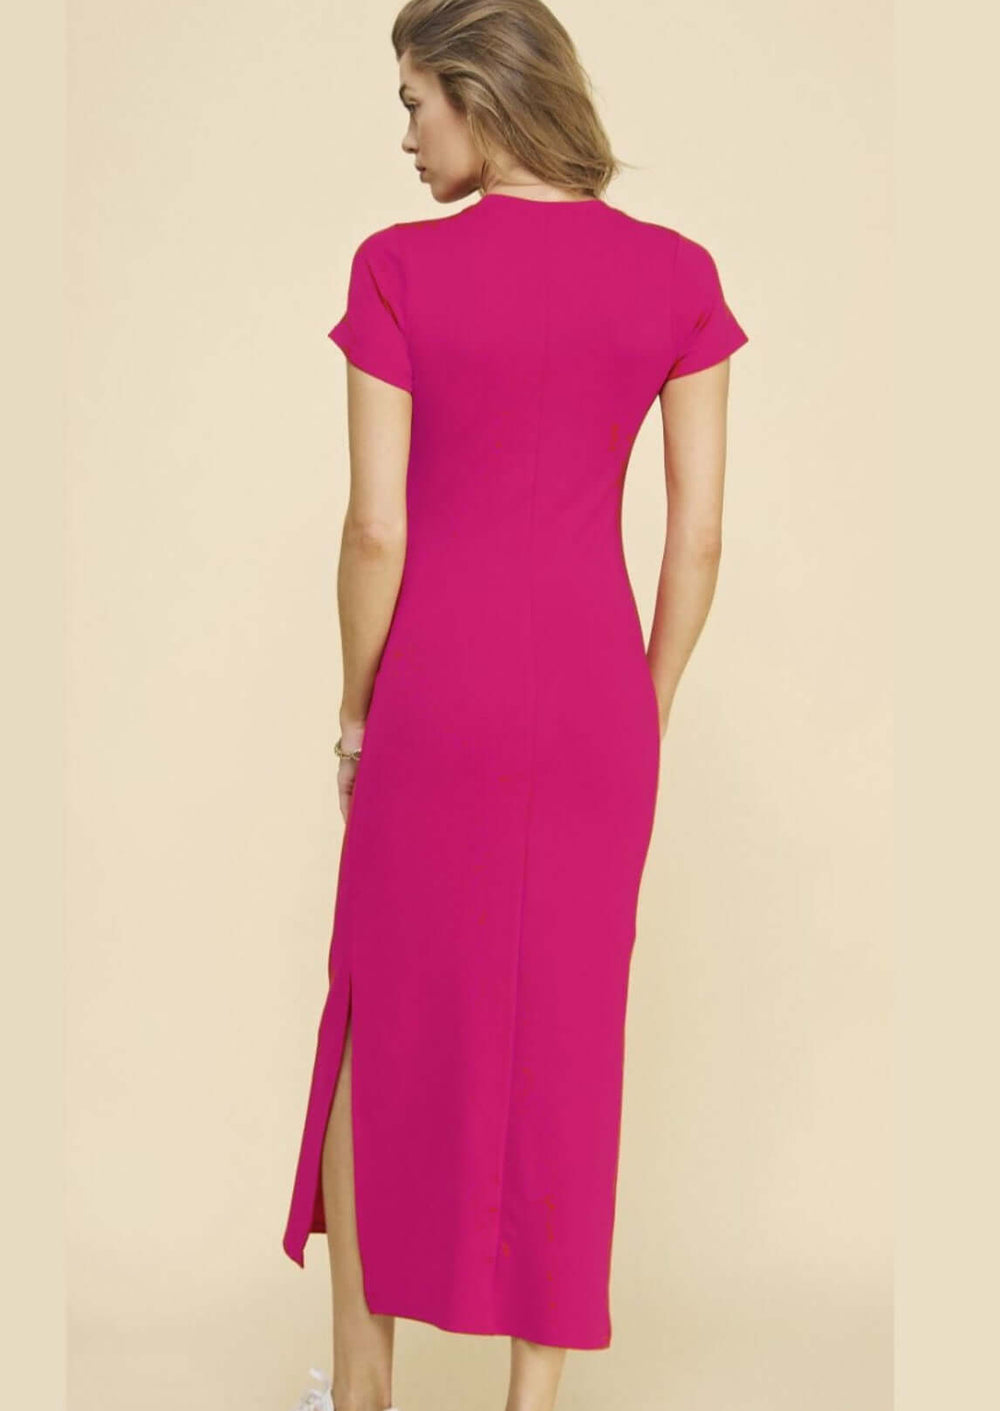 If She Loves Style# ISD1295 | Women's Tie Side Fuchsia Fitted Midi Dress with Side Slits | Made in USA | Classy Cozy Cool Women's Made in America Clothing Boutique